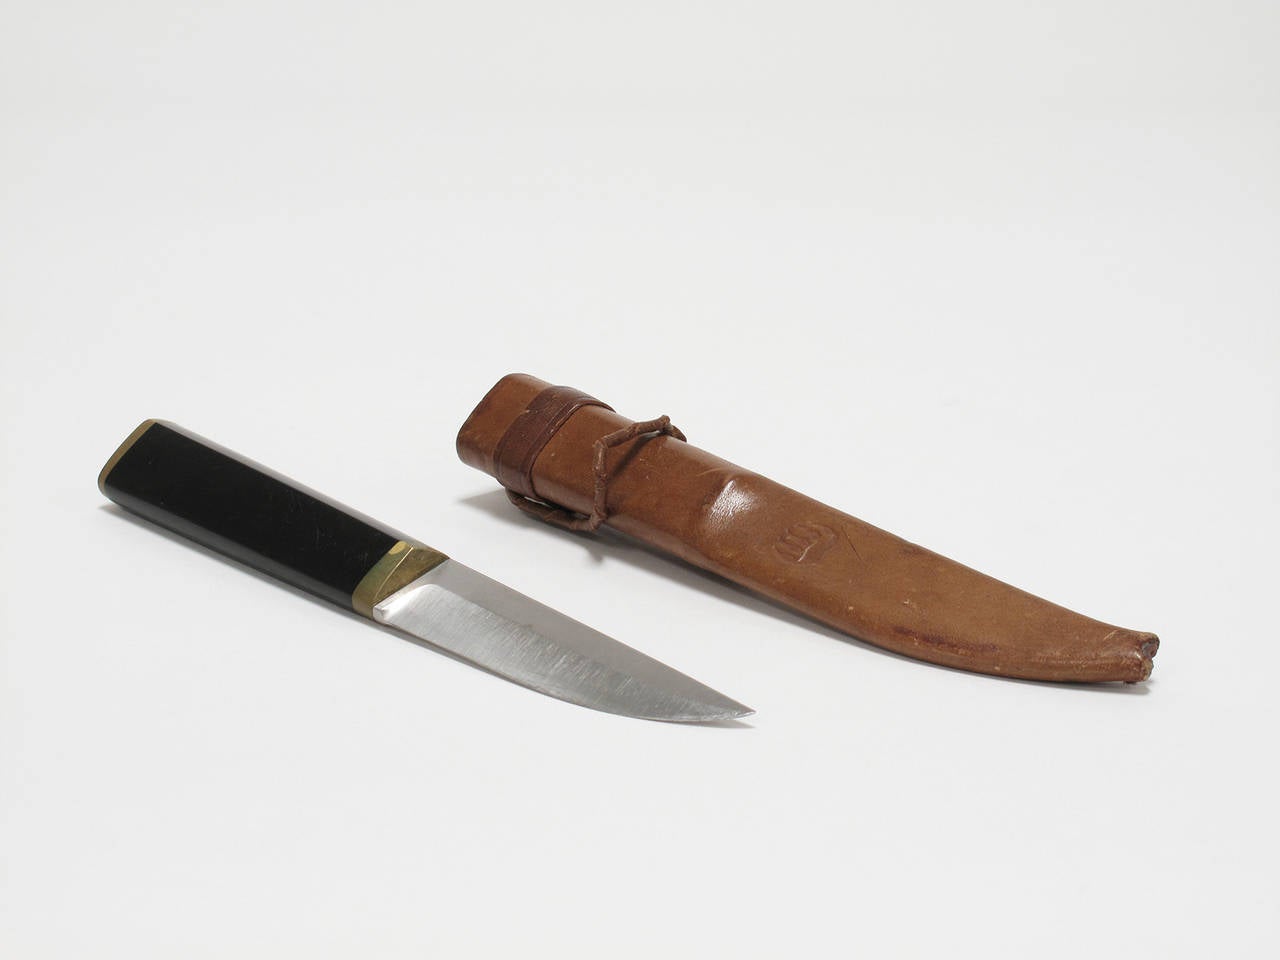 Tapio Wirkkala did much of his initial design work using a traditional Finnish carving knife, the puukko, carving molds for his work by hand. Wirkkala designed his own version of the knife in 1961. The Tapio Wirkkala Puukko was built by Hackman